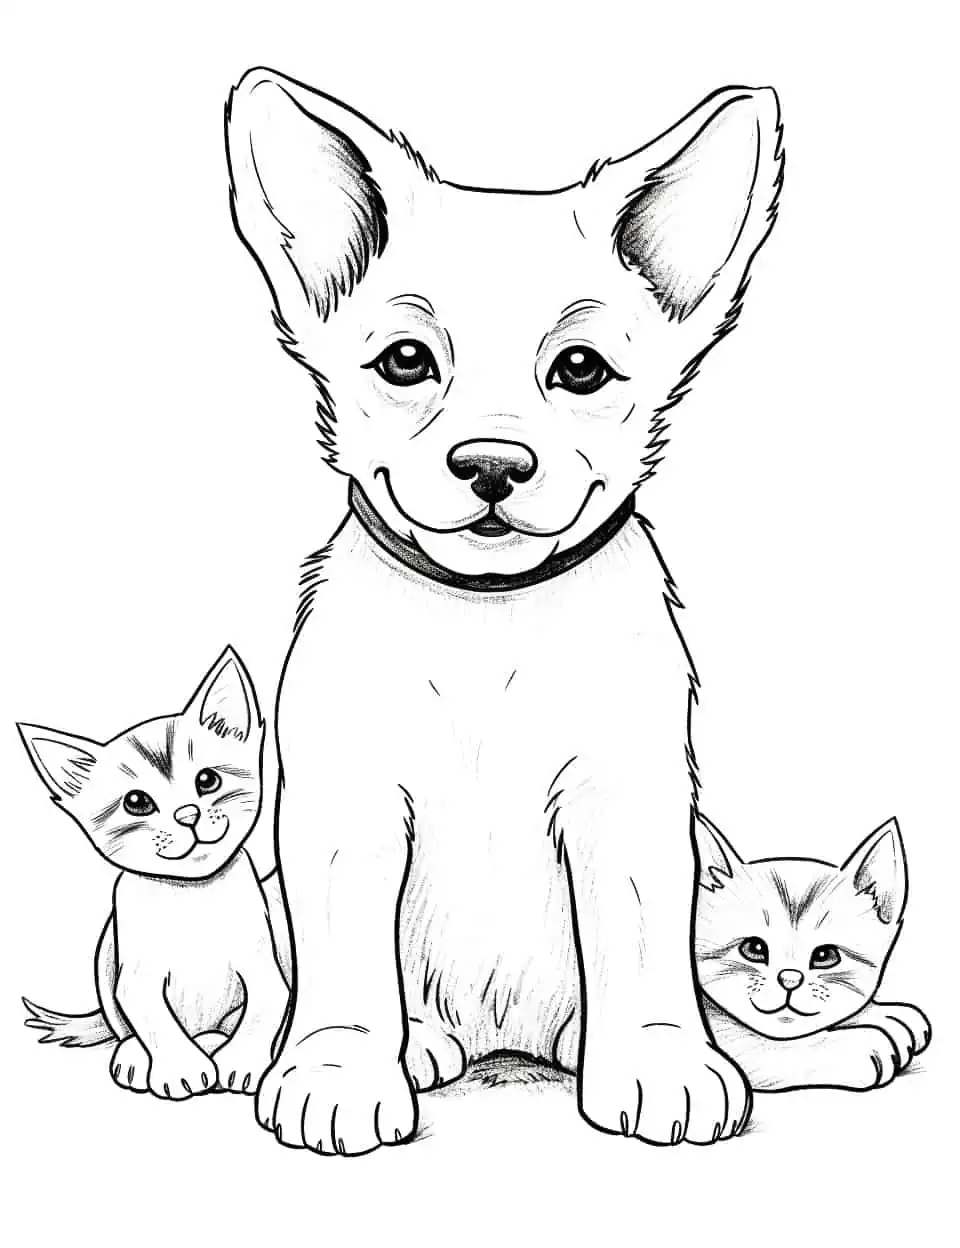 German Shepherd and Kittens Dog Coloring Page - A gentle German Shepherd playing with kittens, showing their protective nature.